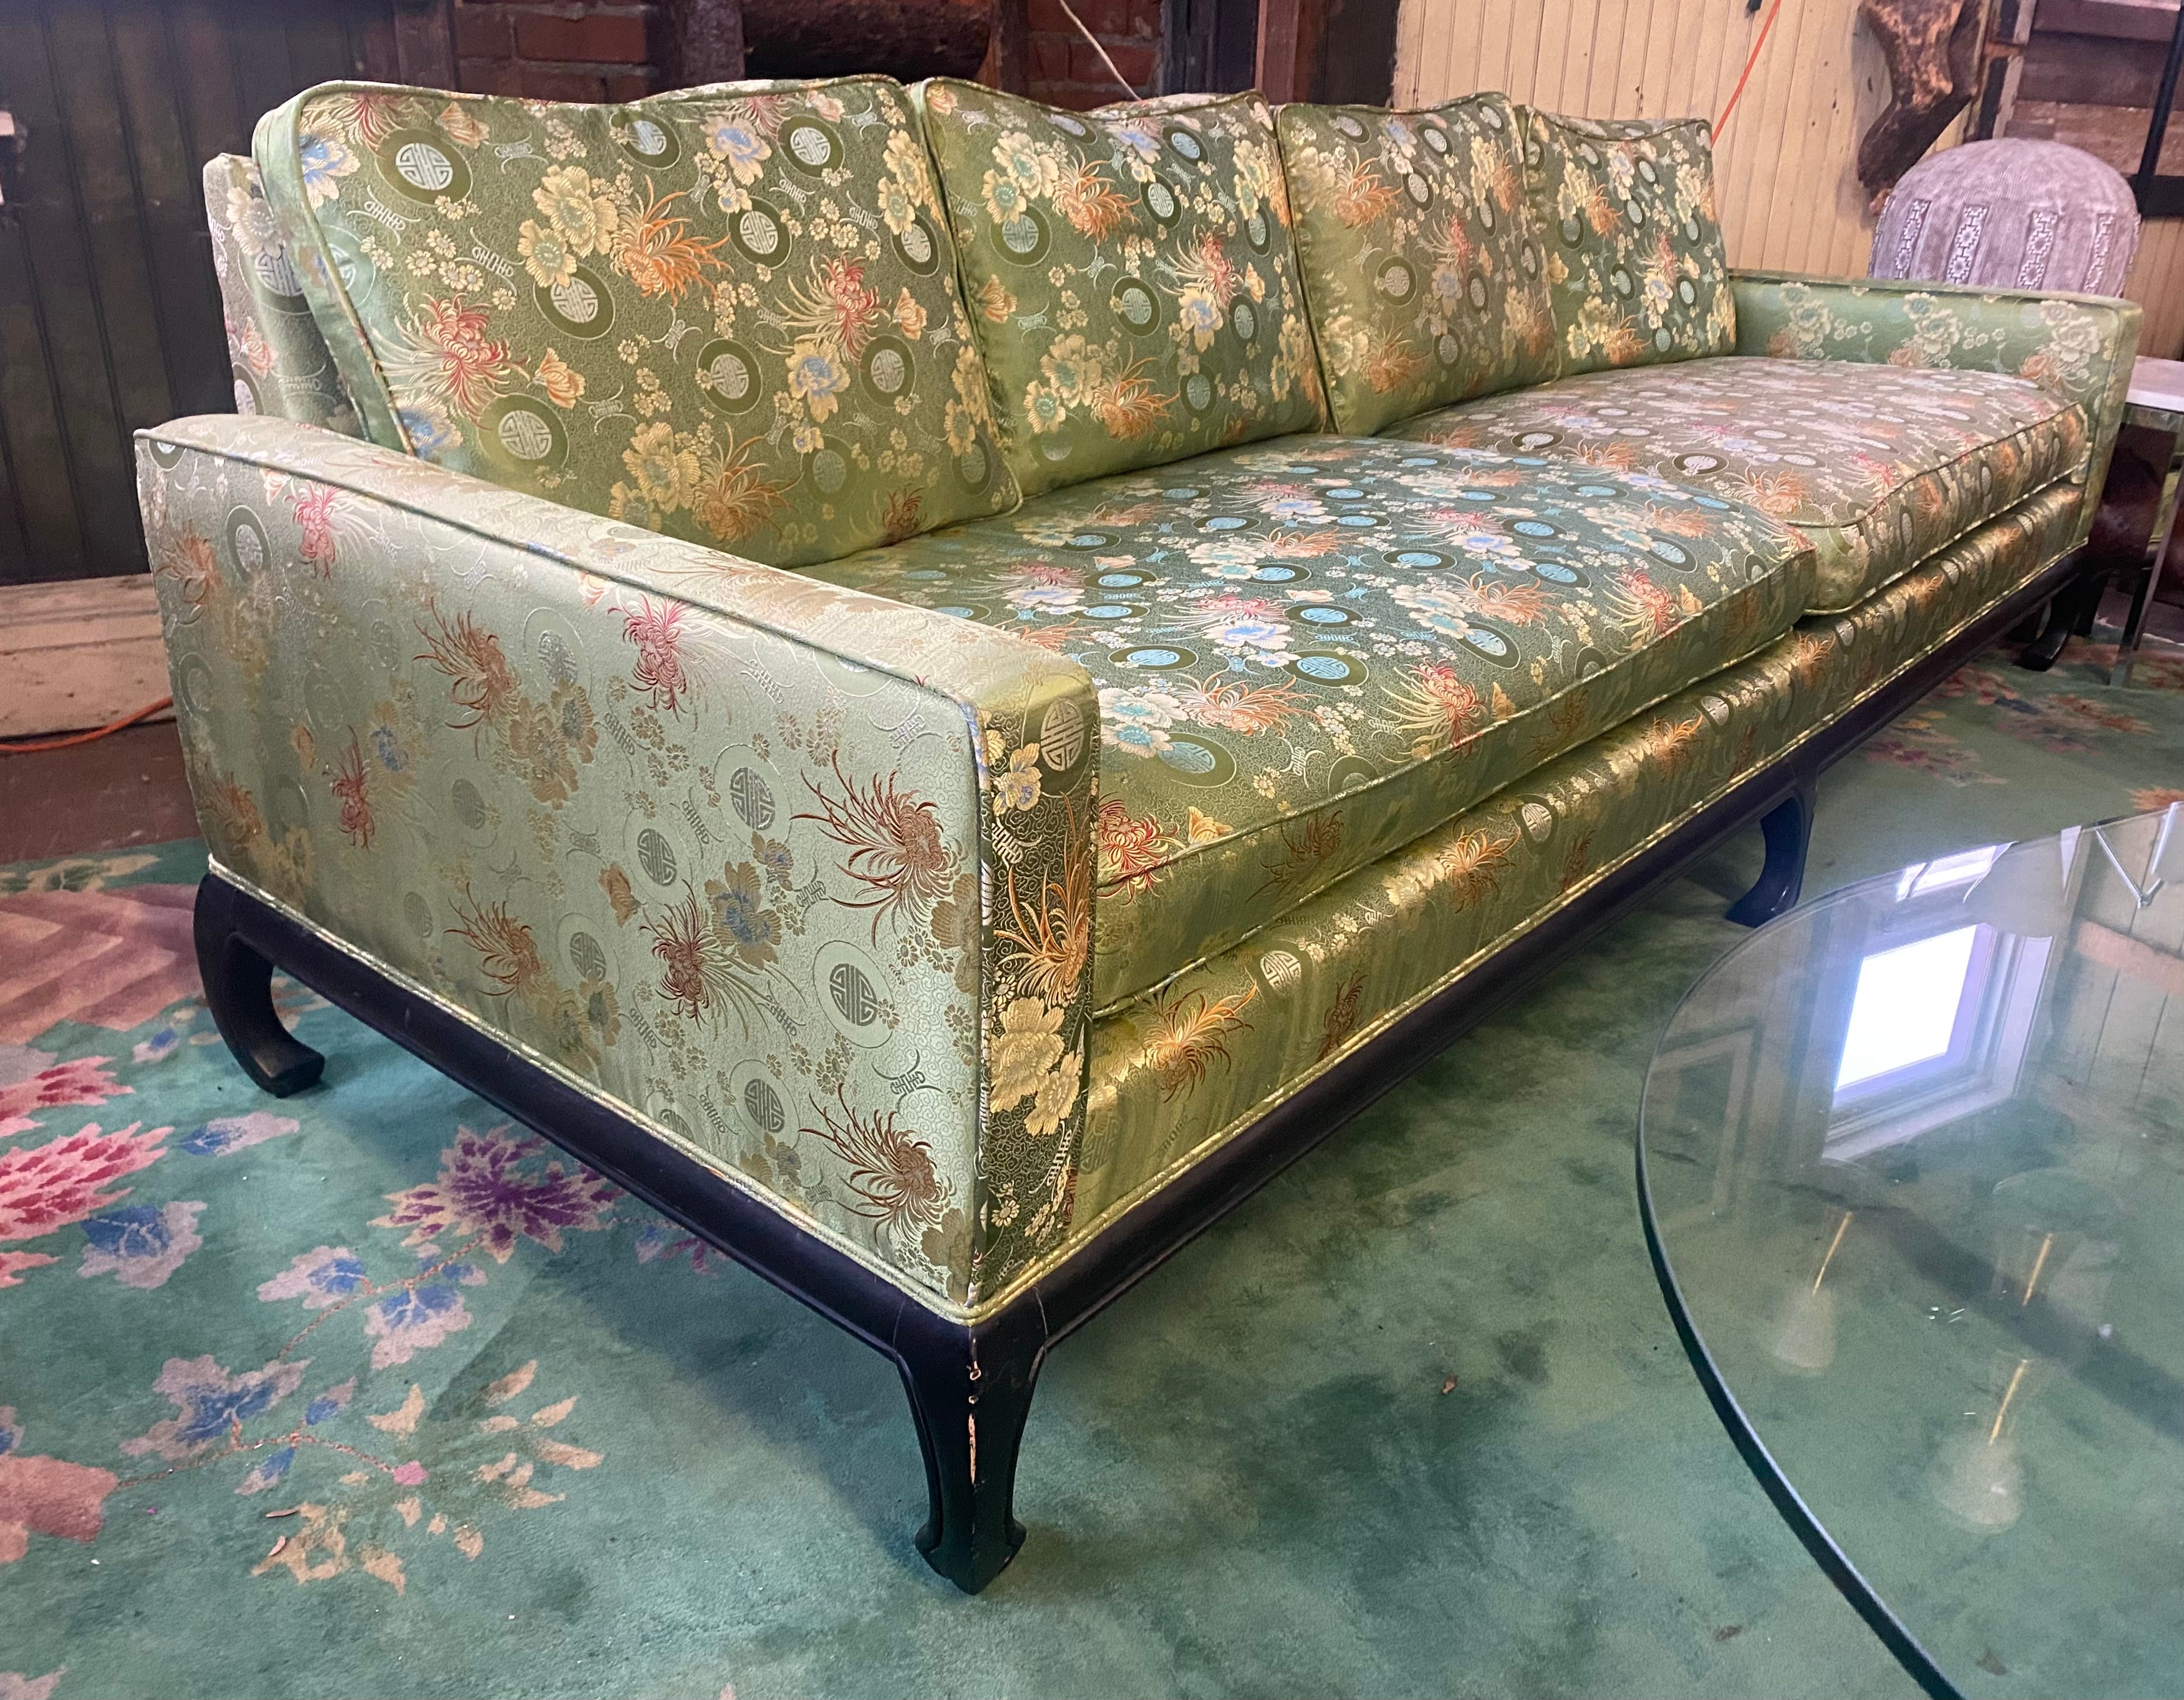 Stunning Asian James Mont style sofa with black lacquer base, circa 1960s. This wonderful sofa also has lovely Chow style legs,. Retains its original silk upholstery. Stunning color, pattern, design. Also retains ts original down filled cushions,